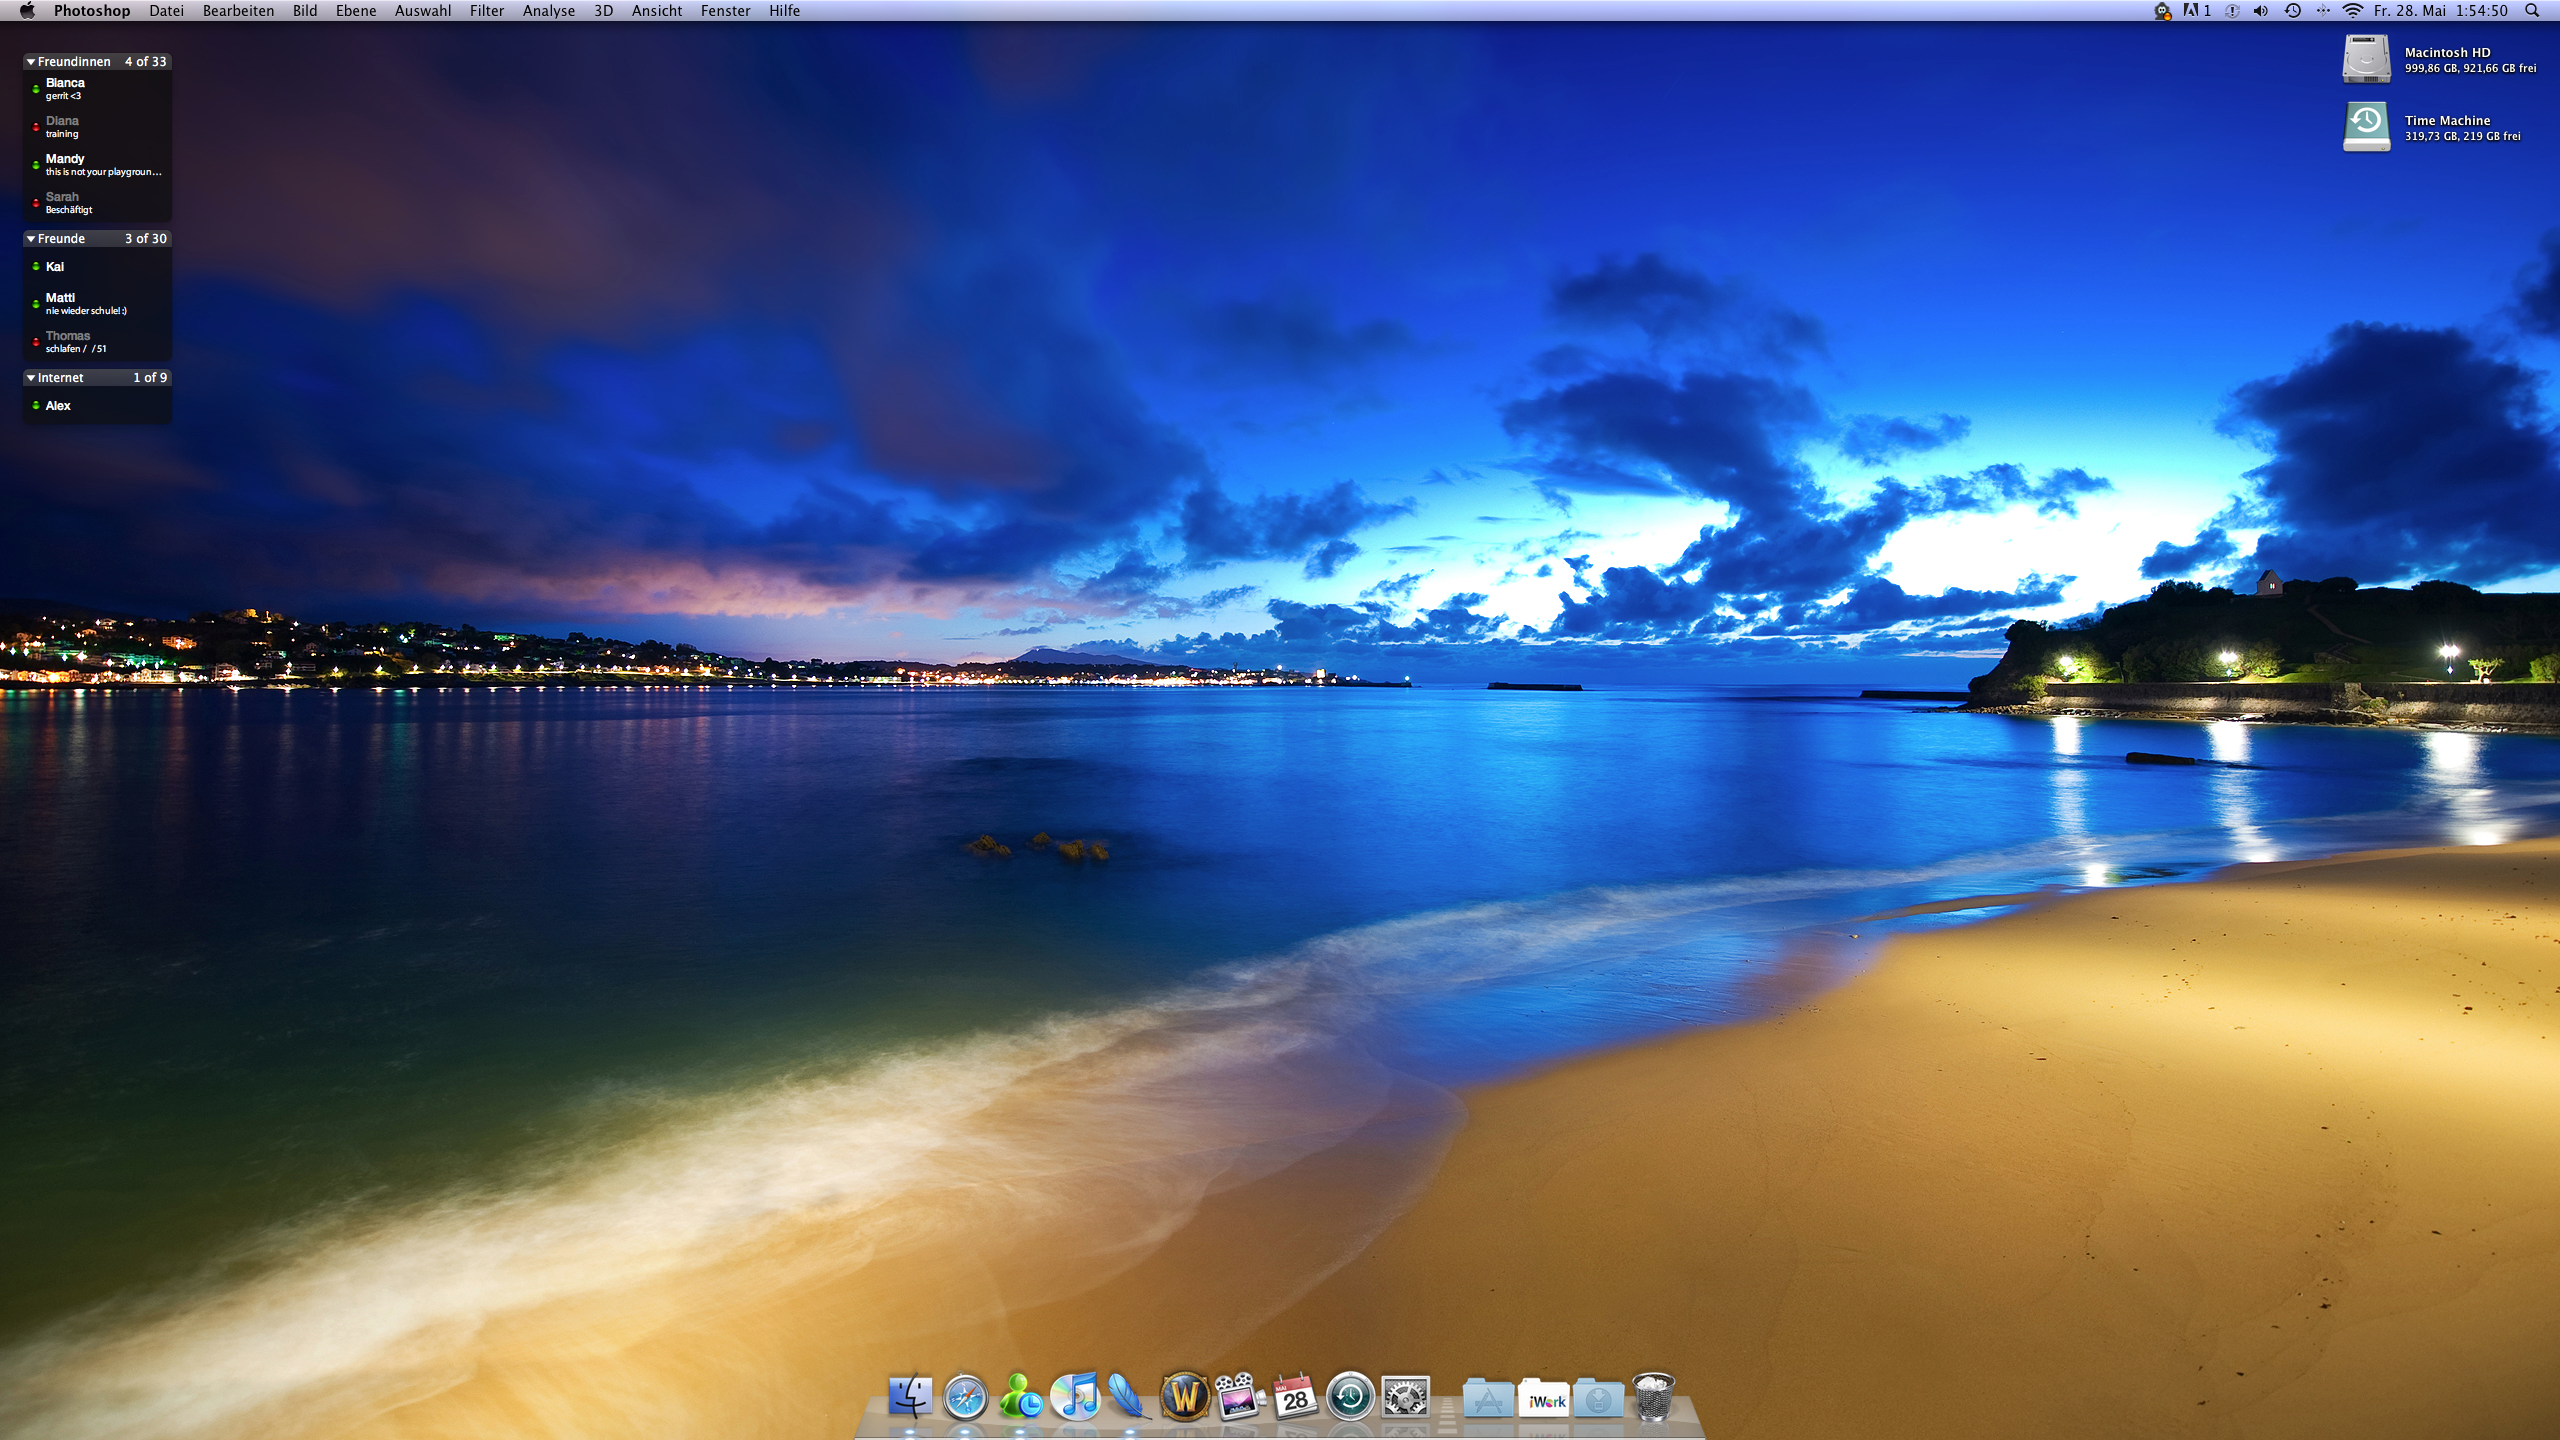 Best Imac 27 Inch Wallpaper - fcb a ad a f f ed ea wallpapers with